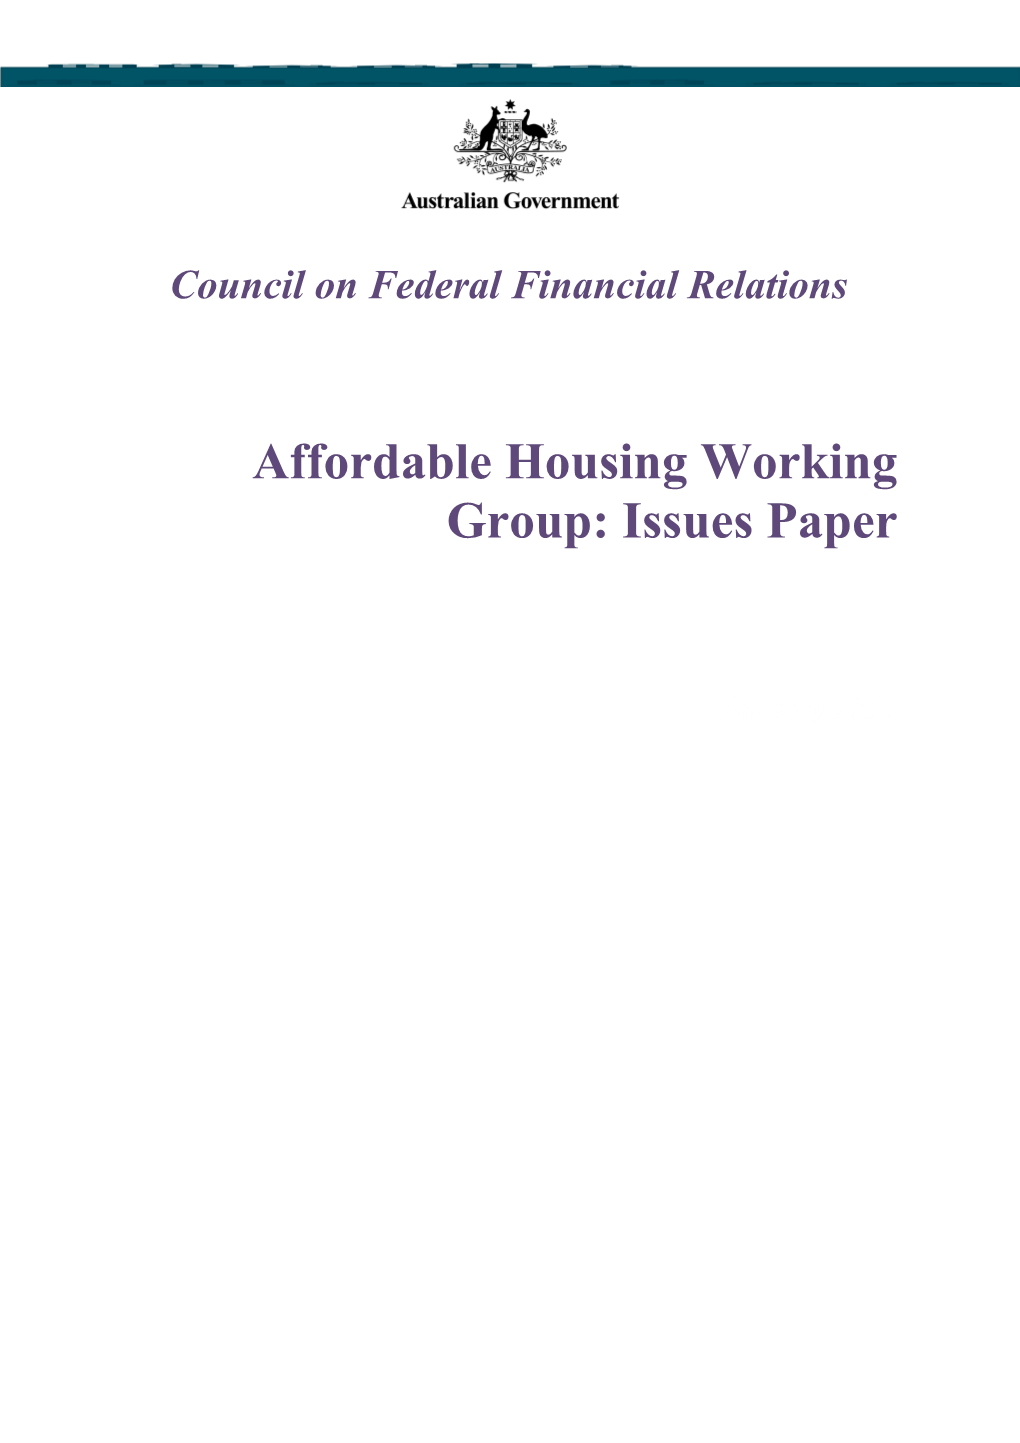 Council on Federal Financial Relations Affordable Housing Working Group - Innovative Financing